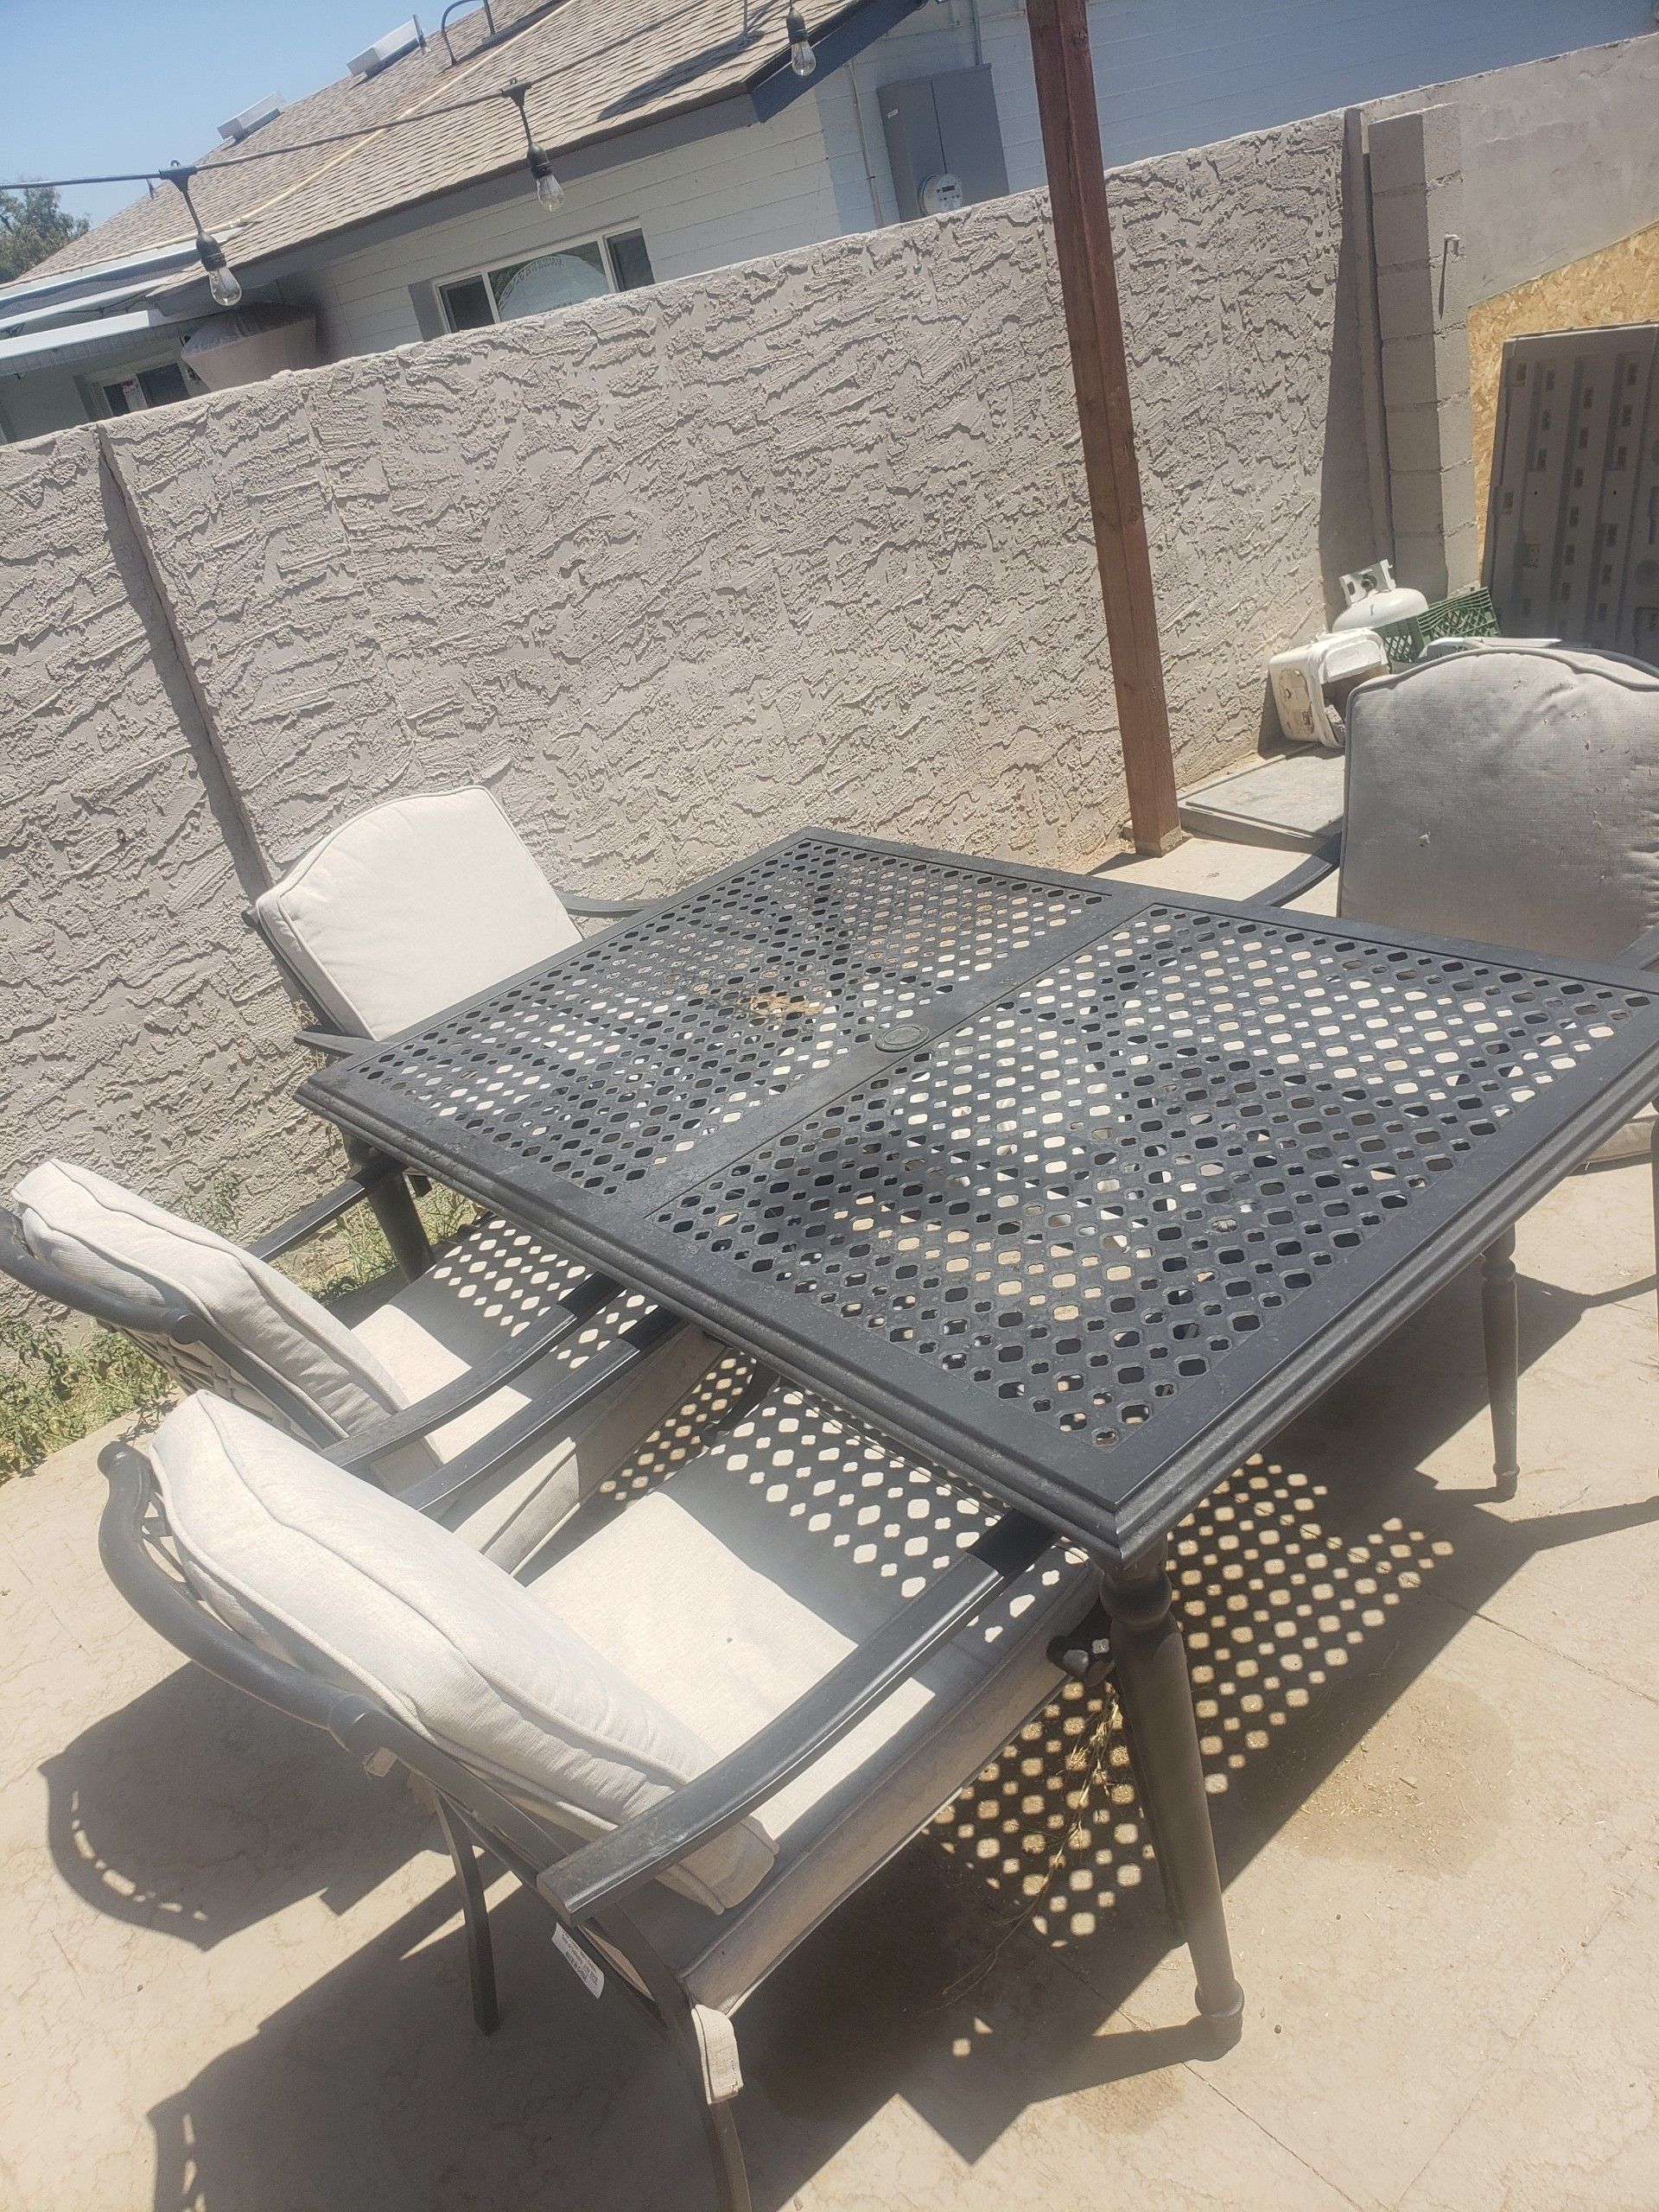 Patio furniture must go moving